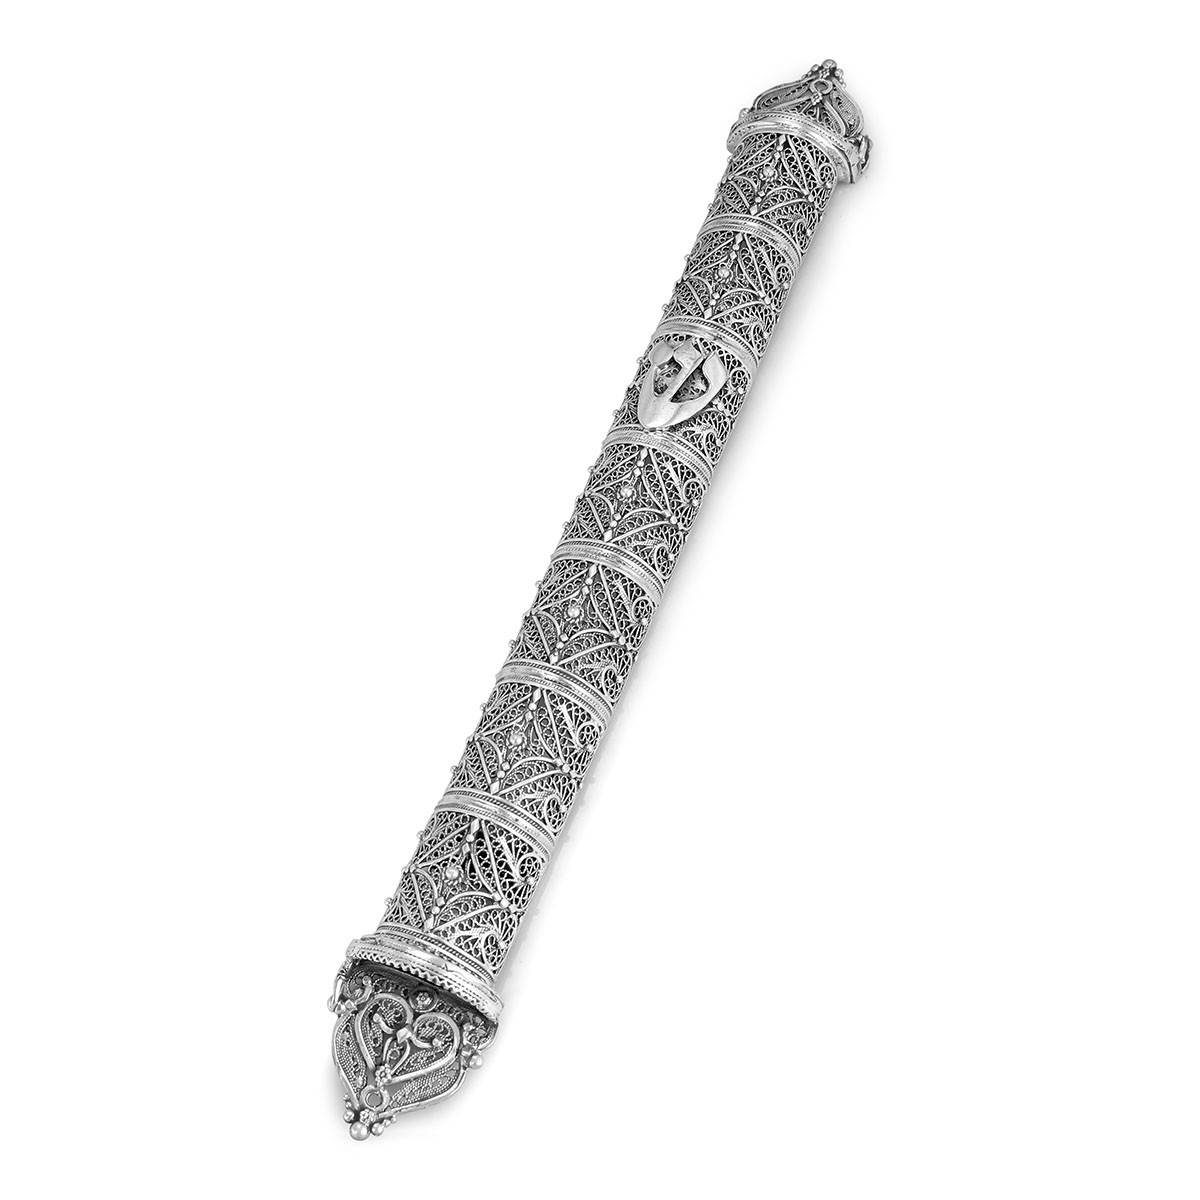 Traditional Yemenite Art Grand Extra Large Handcrafted Sterling Silver Mezuzah Case With Filigree Design - 1